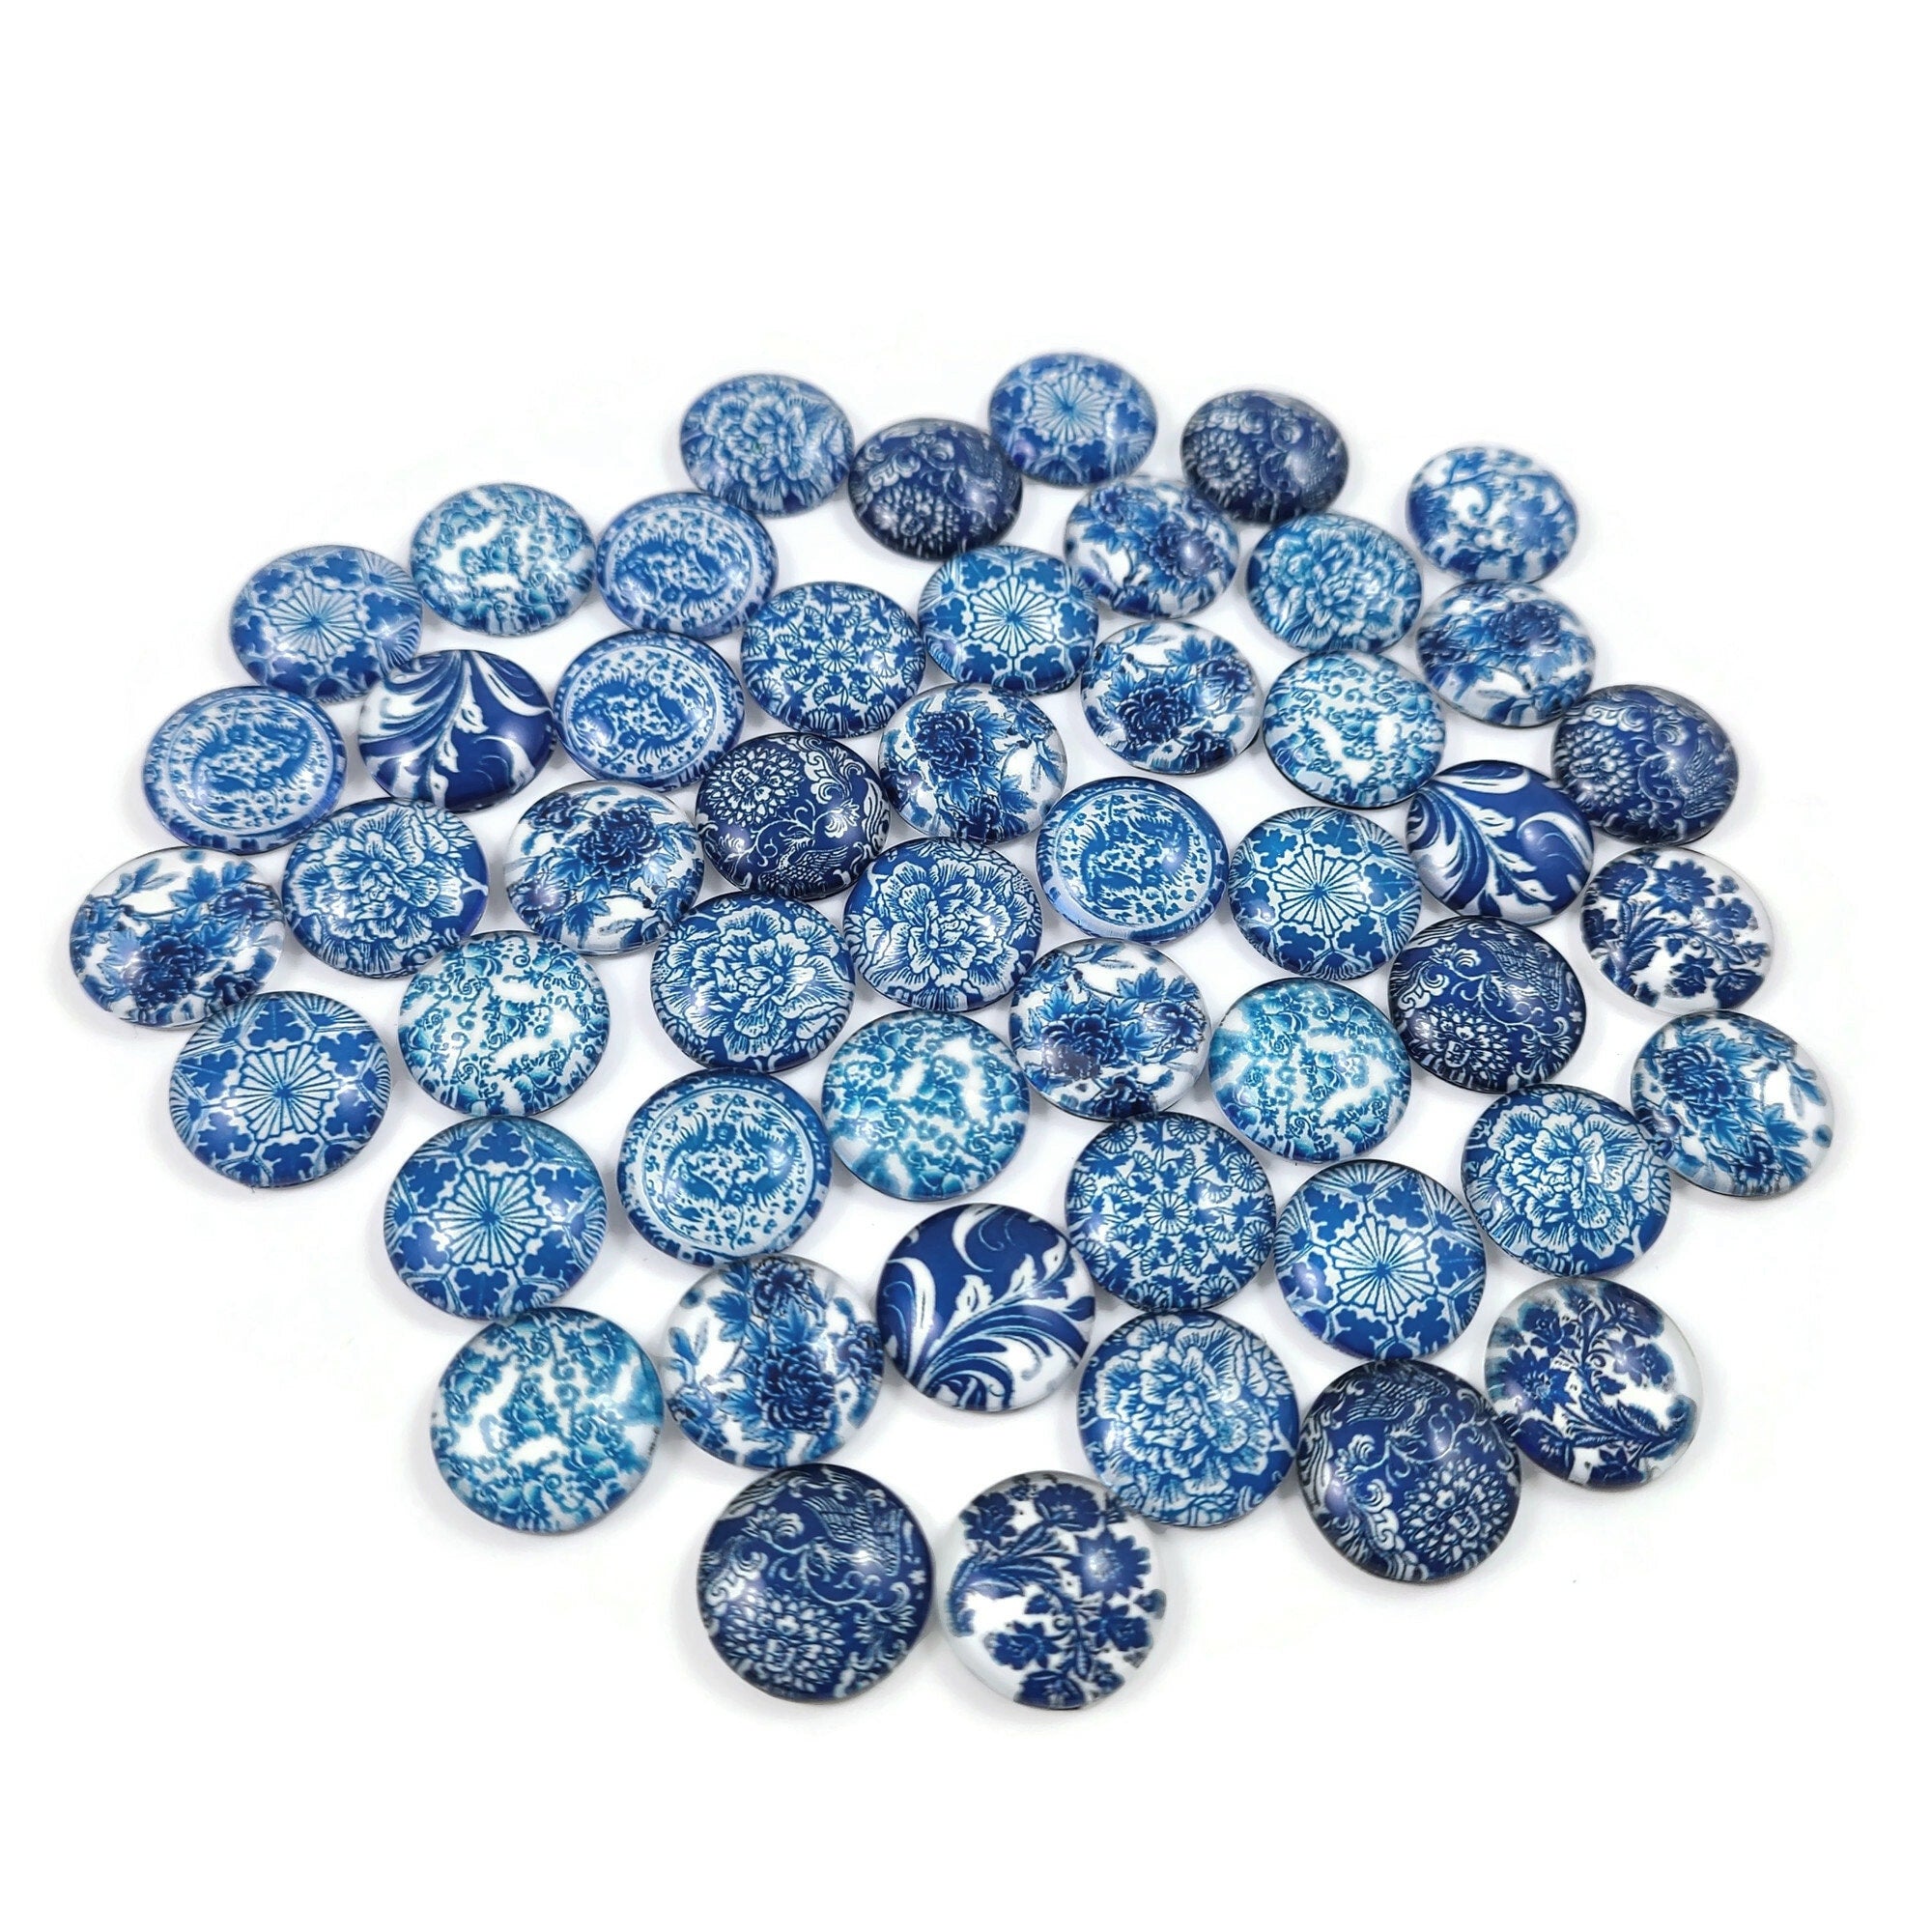 Mixed blue flower glass cabochons, White porcelain photo round dome